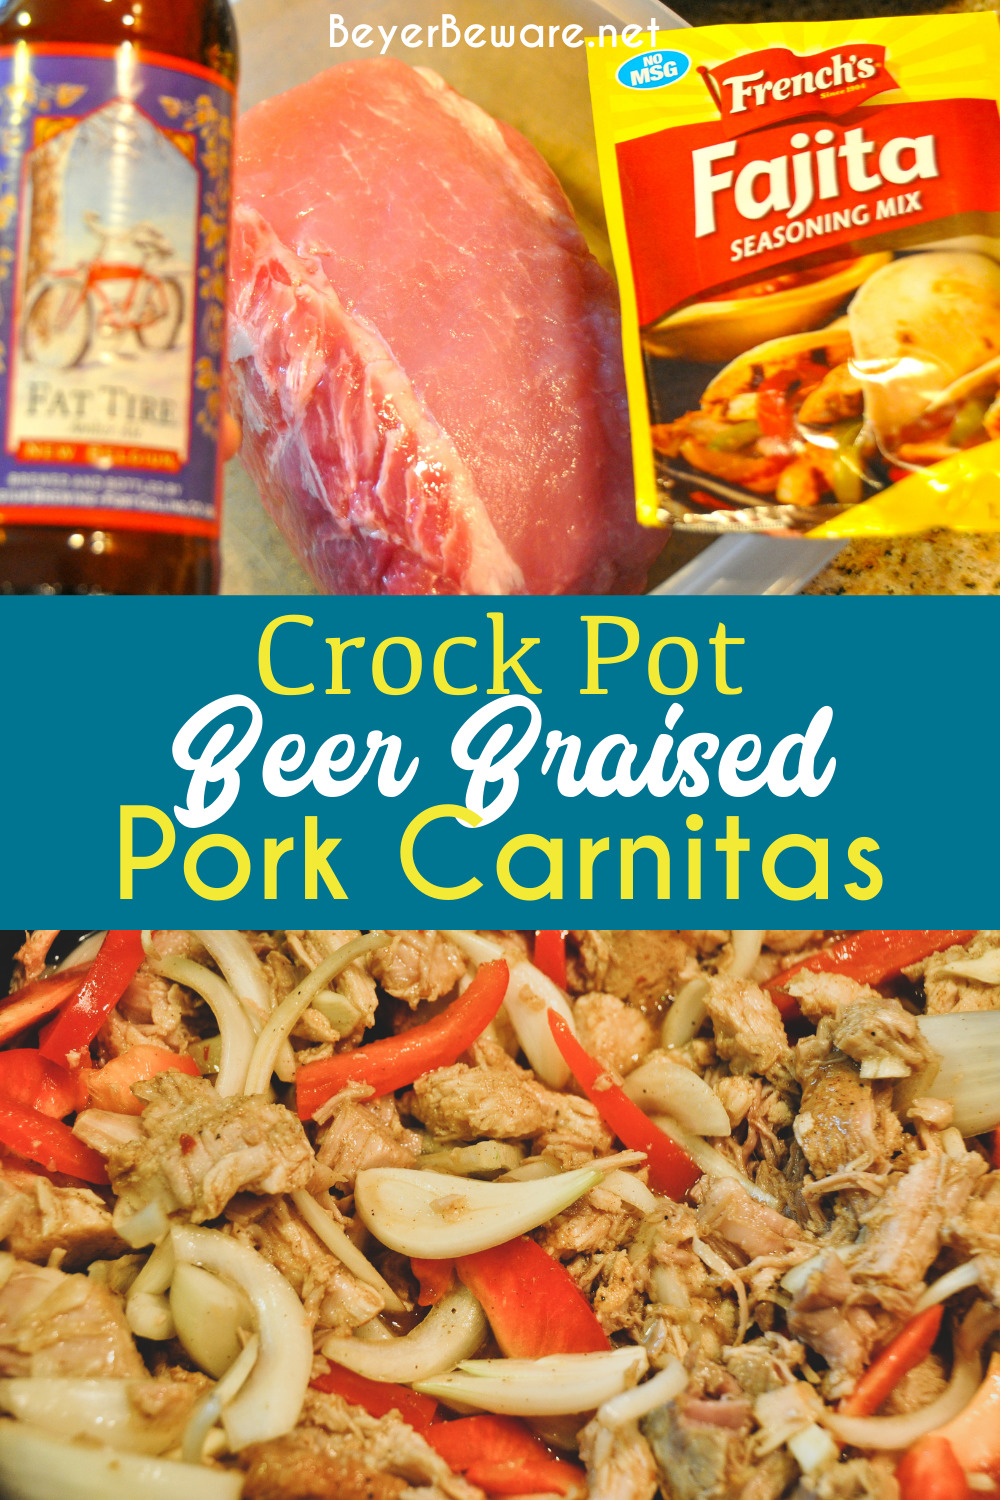 Beer braised crock pot pork carnitas start with a braise in beer and then simmer all day in fajita seasonings and beer before having lots of onions and peppers added into the slow cooker to make the most tender beer braised pork carnitas right at home.